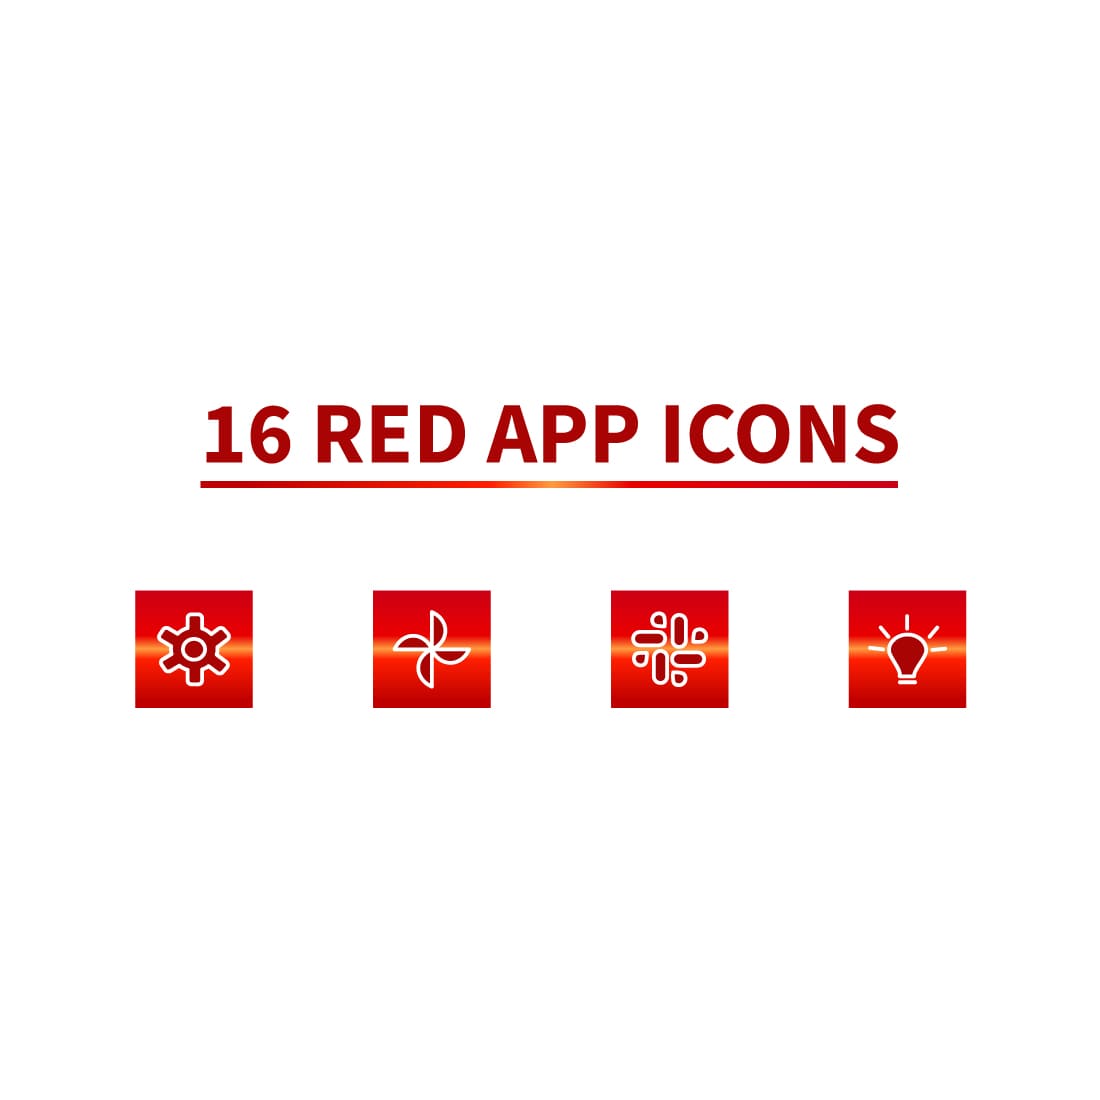 1100 2 Red App Icons.